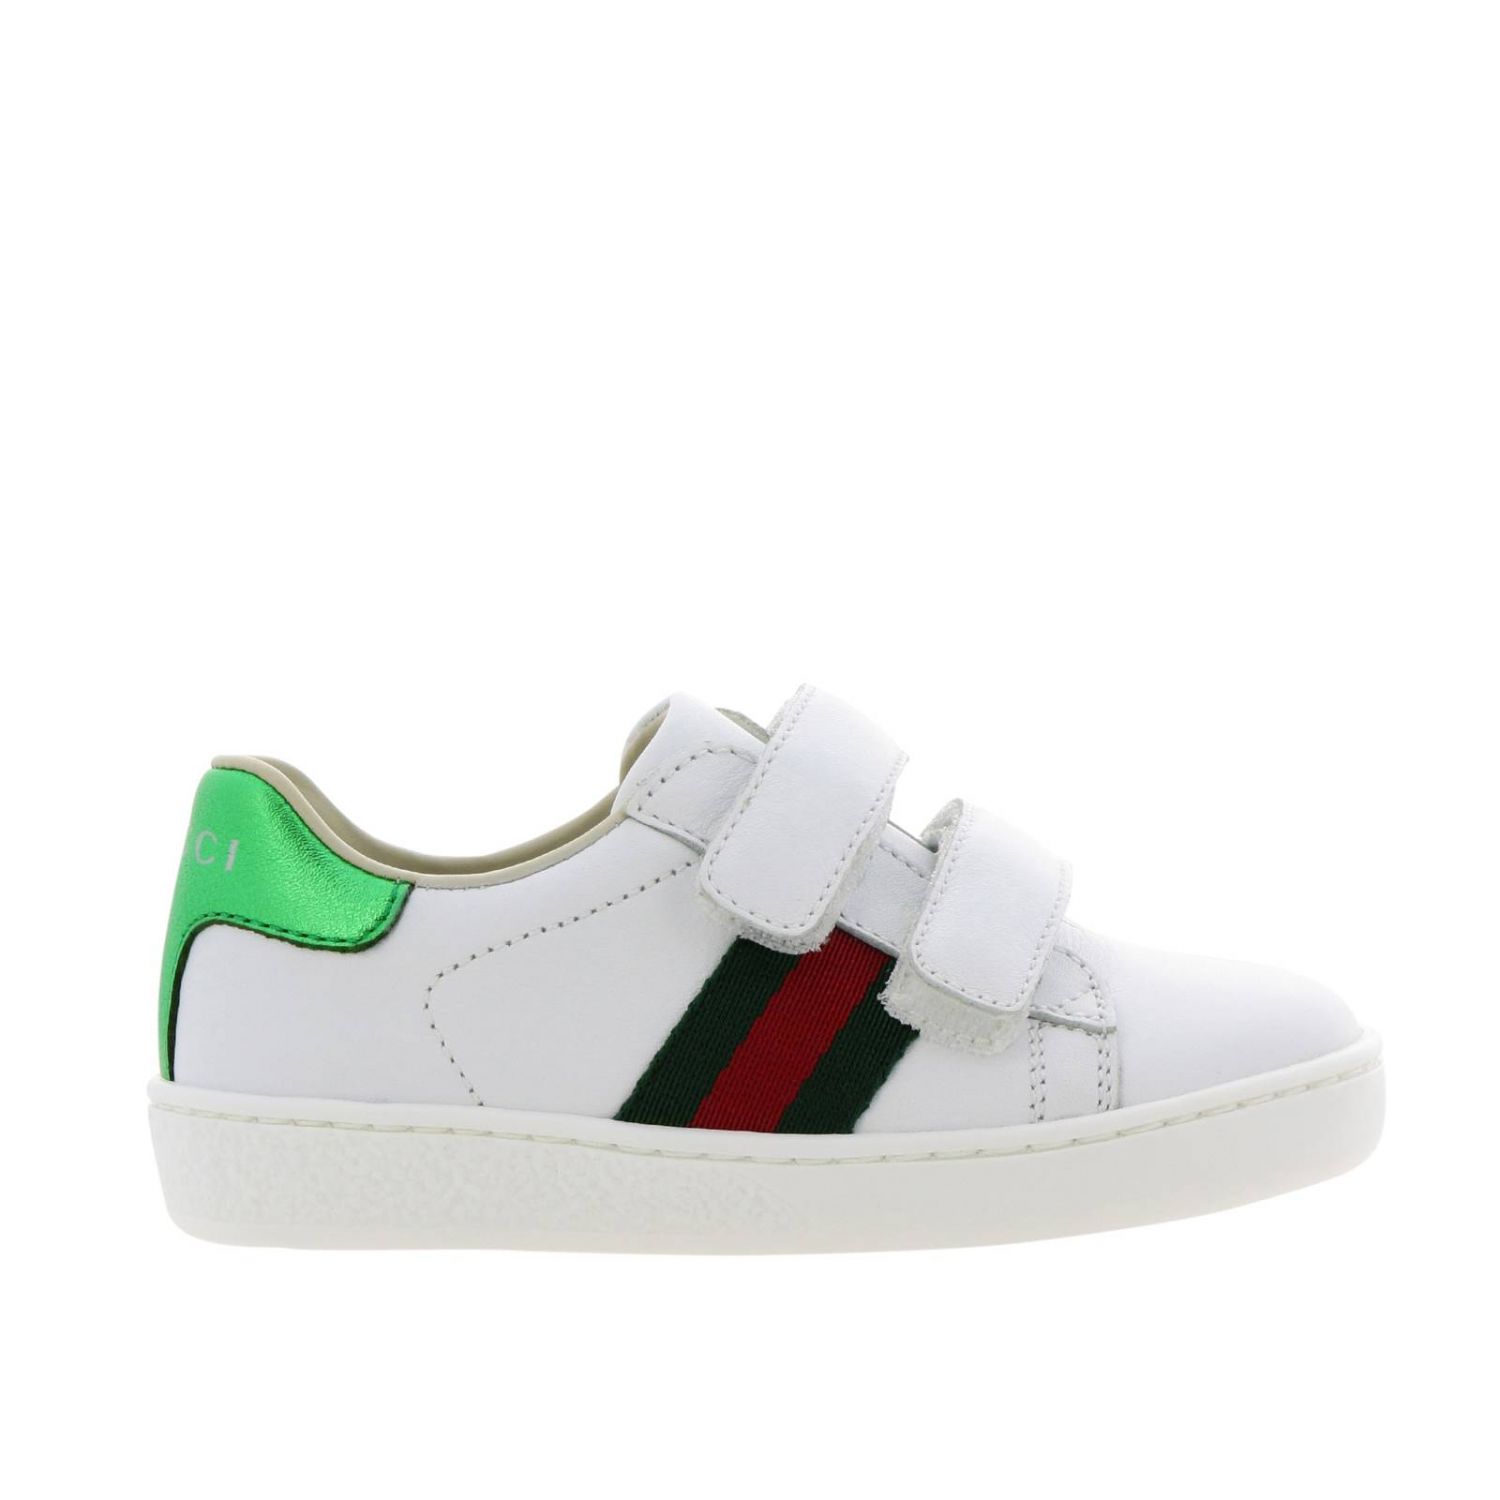 GUCCI: shoes for boys - White | Gucci shoes 455447 CPWP0 online on ...